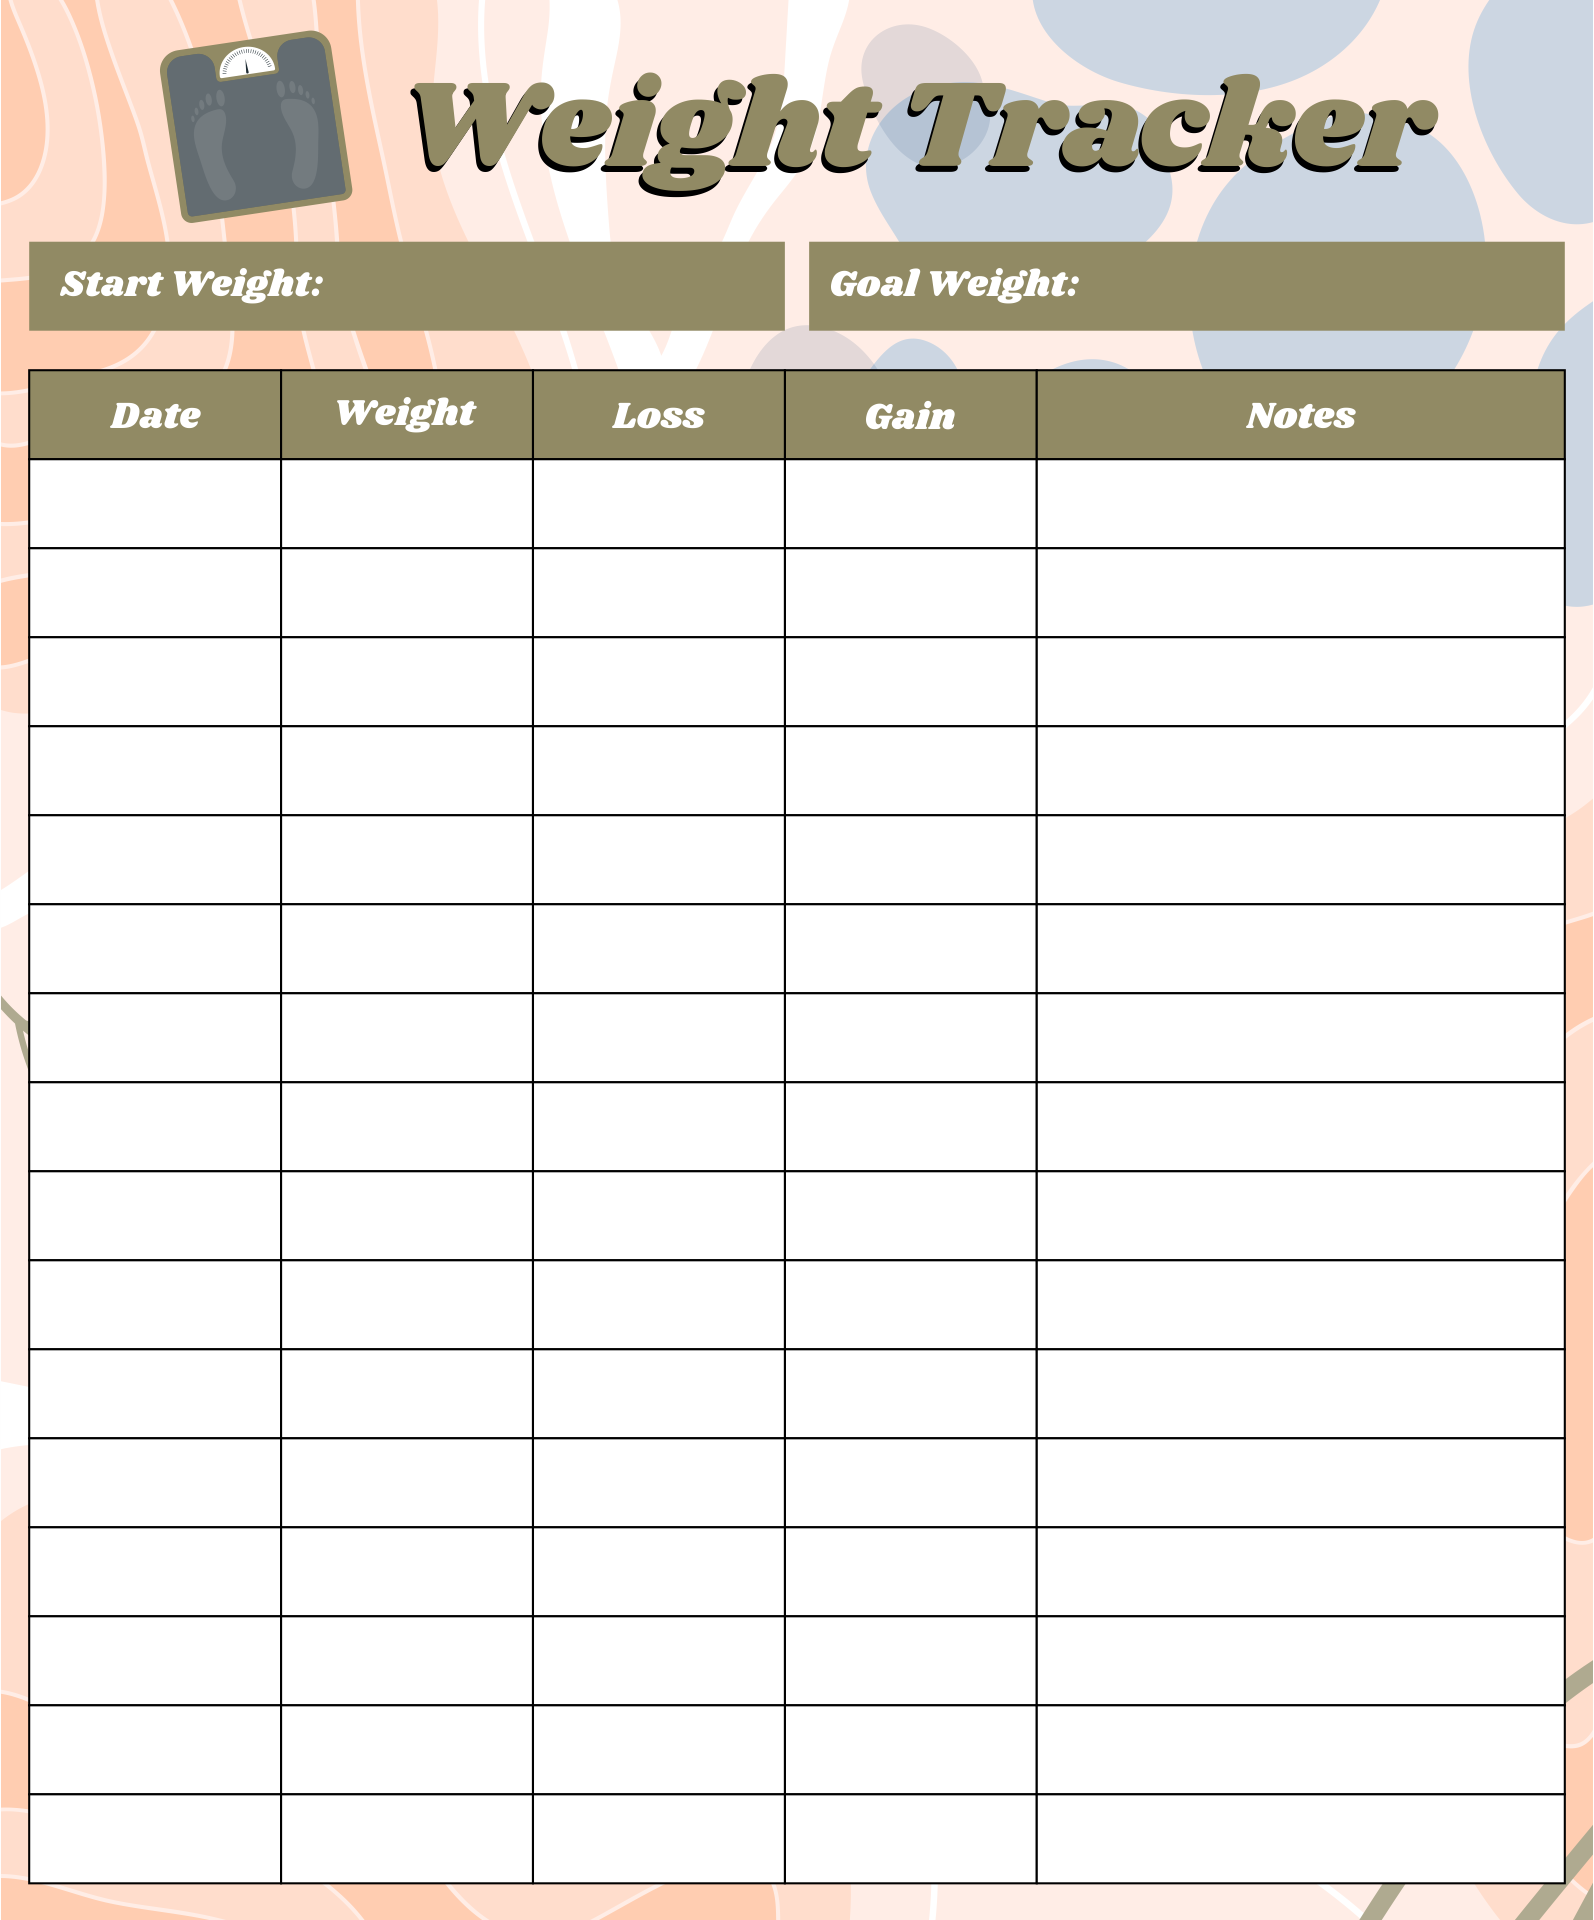 8 Best Images of Weight Tracker Printable - Free Printable Weight ...